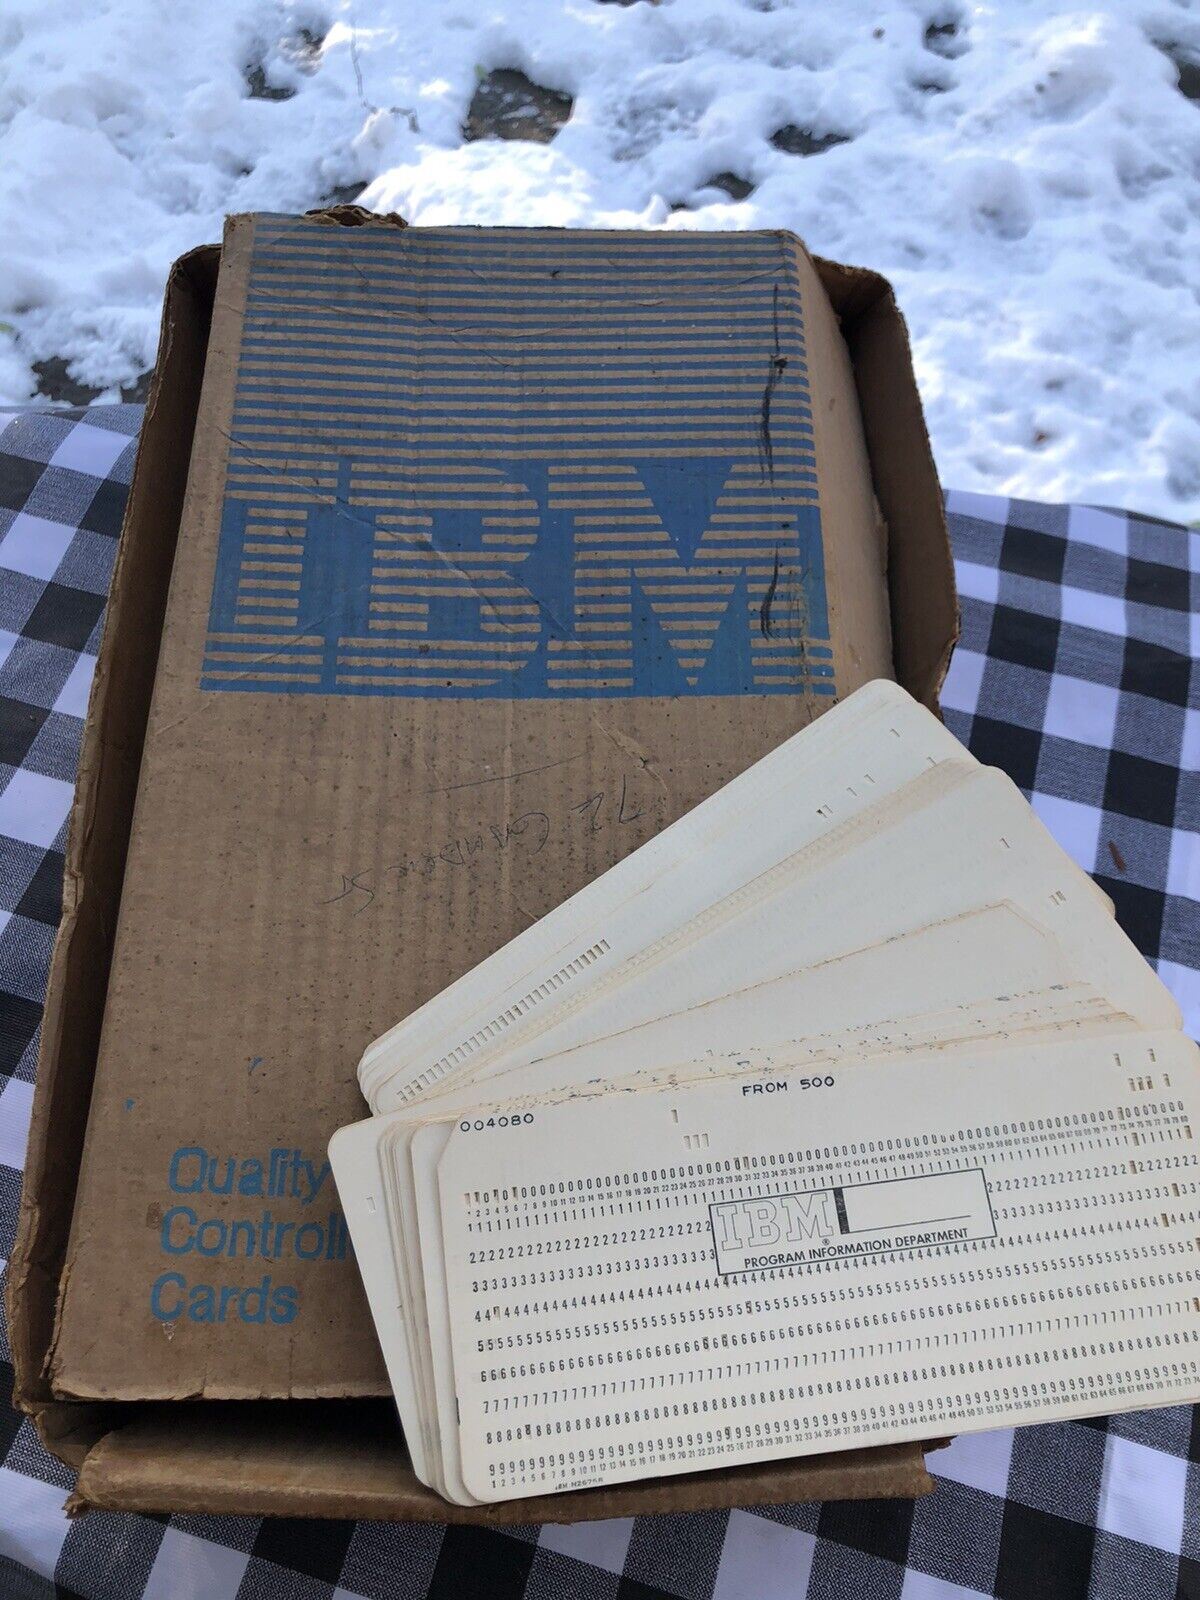 Lot 25 Vintage IBM Computer Hollerith Punch Cards 1972